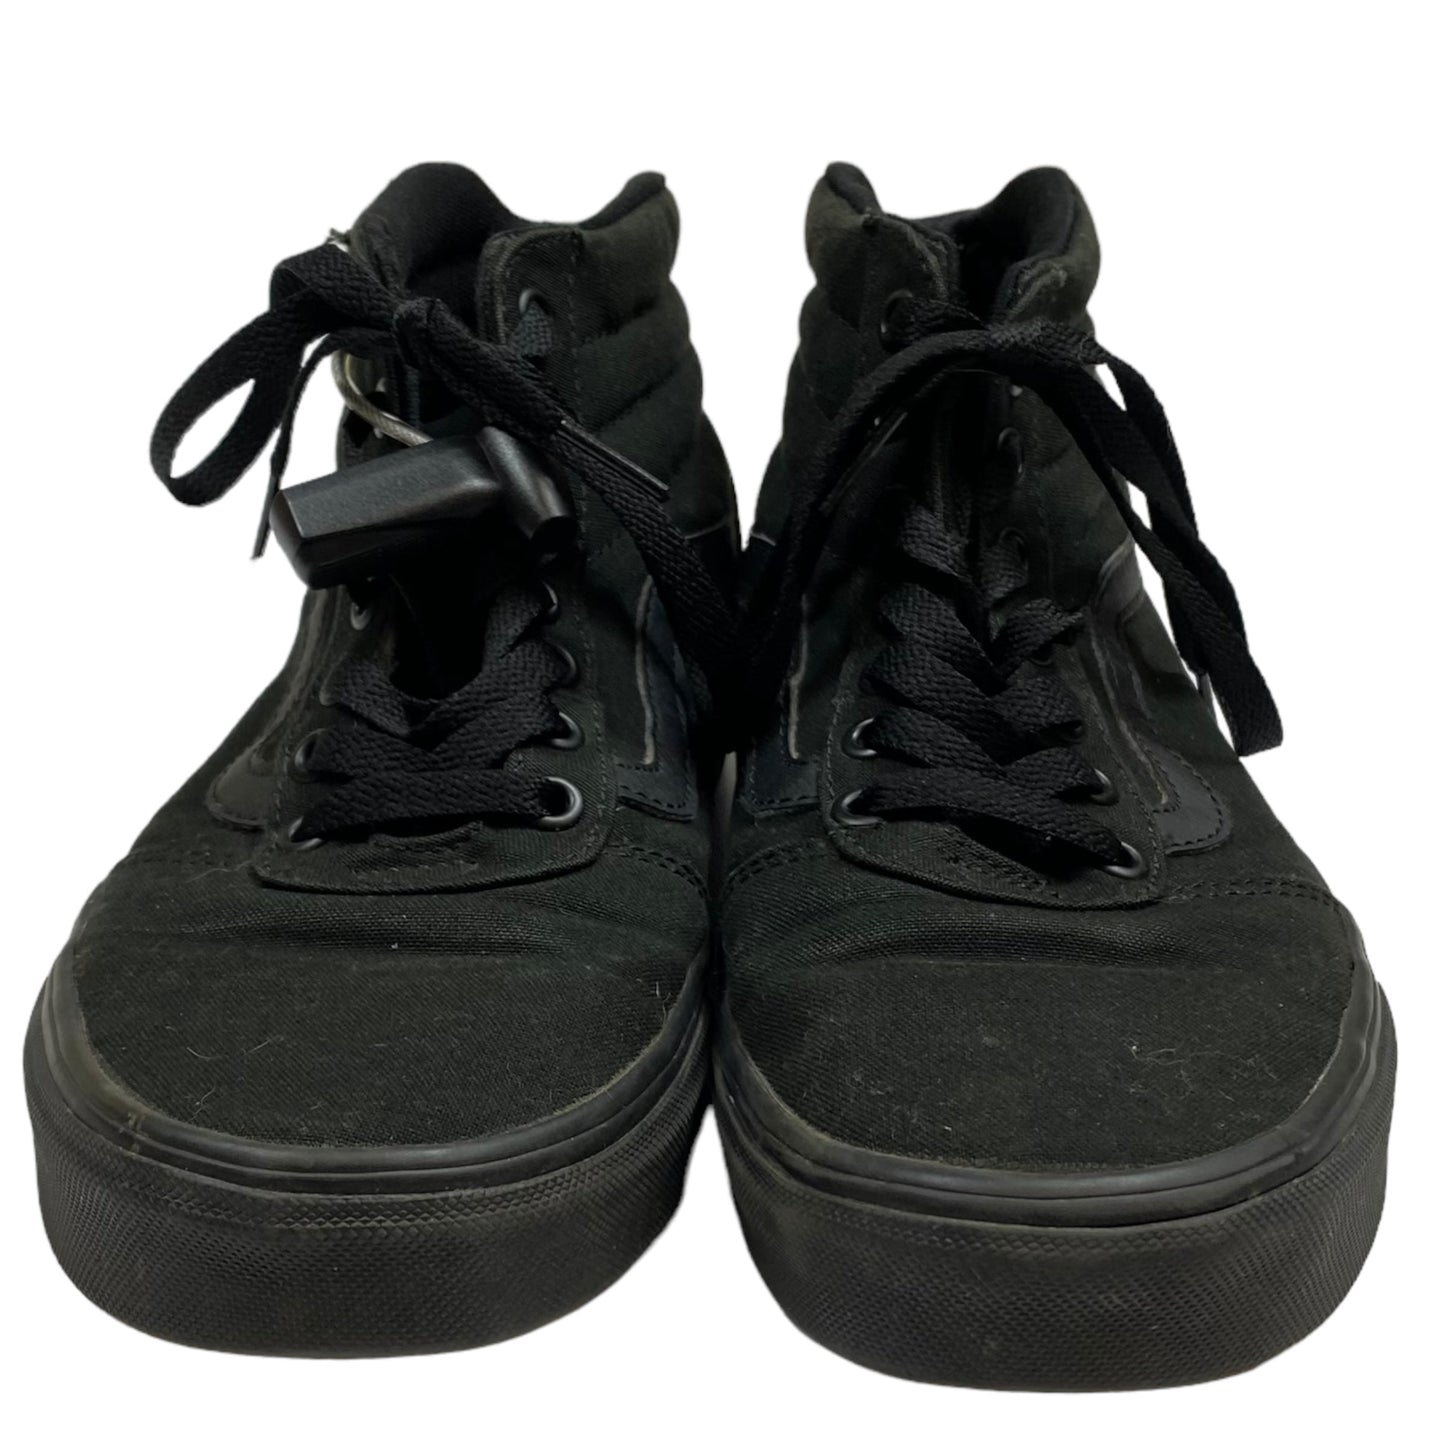 Shoes Sneakers By Vans  Size: 8.5